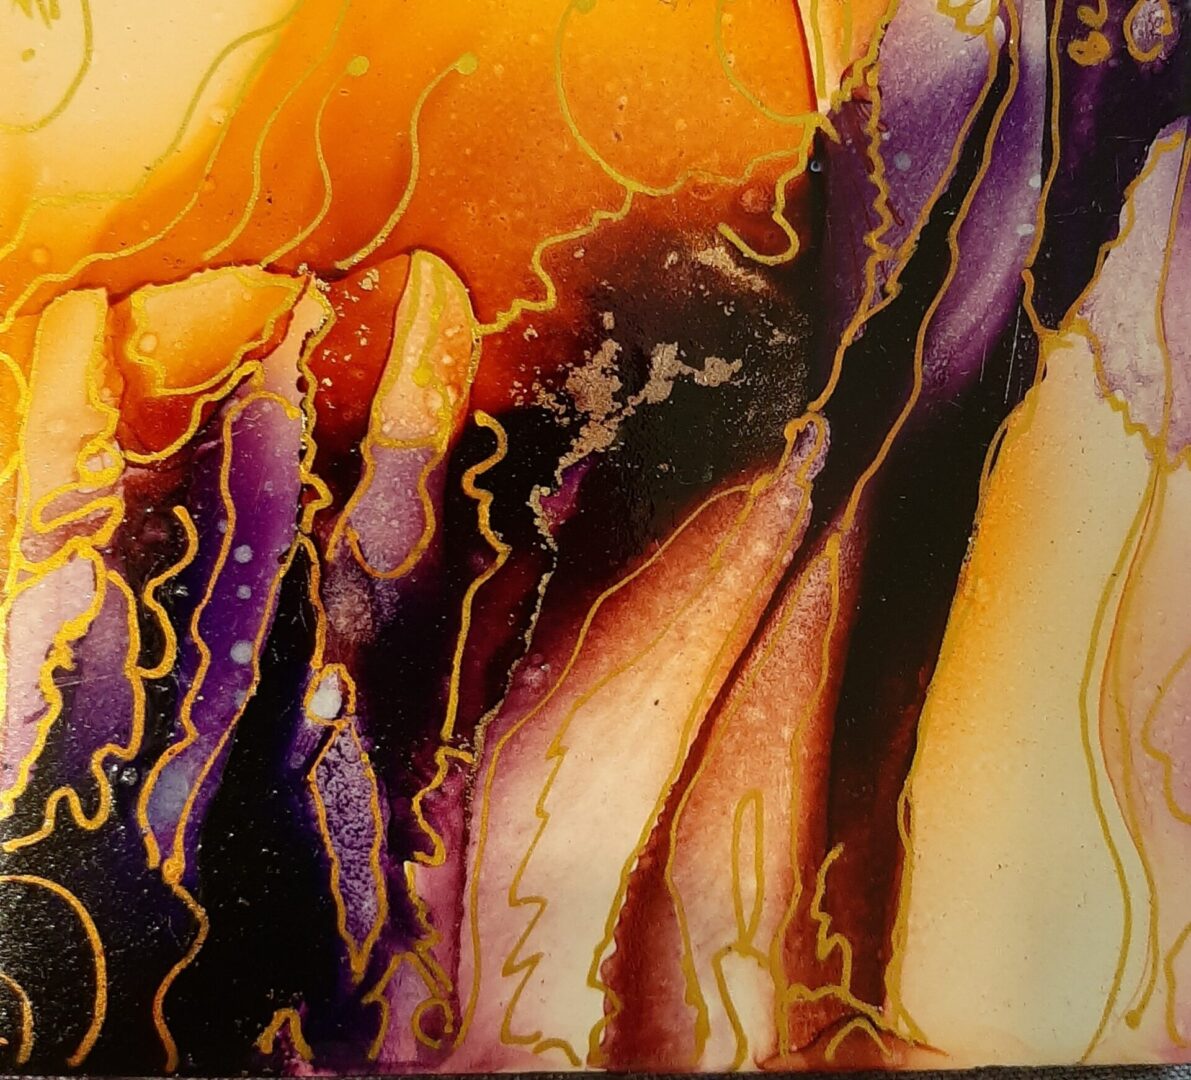 A close up of the painting with purple and yellow colors